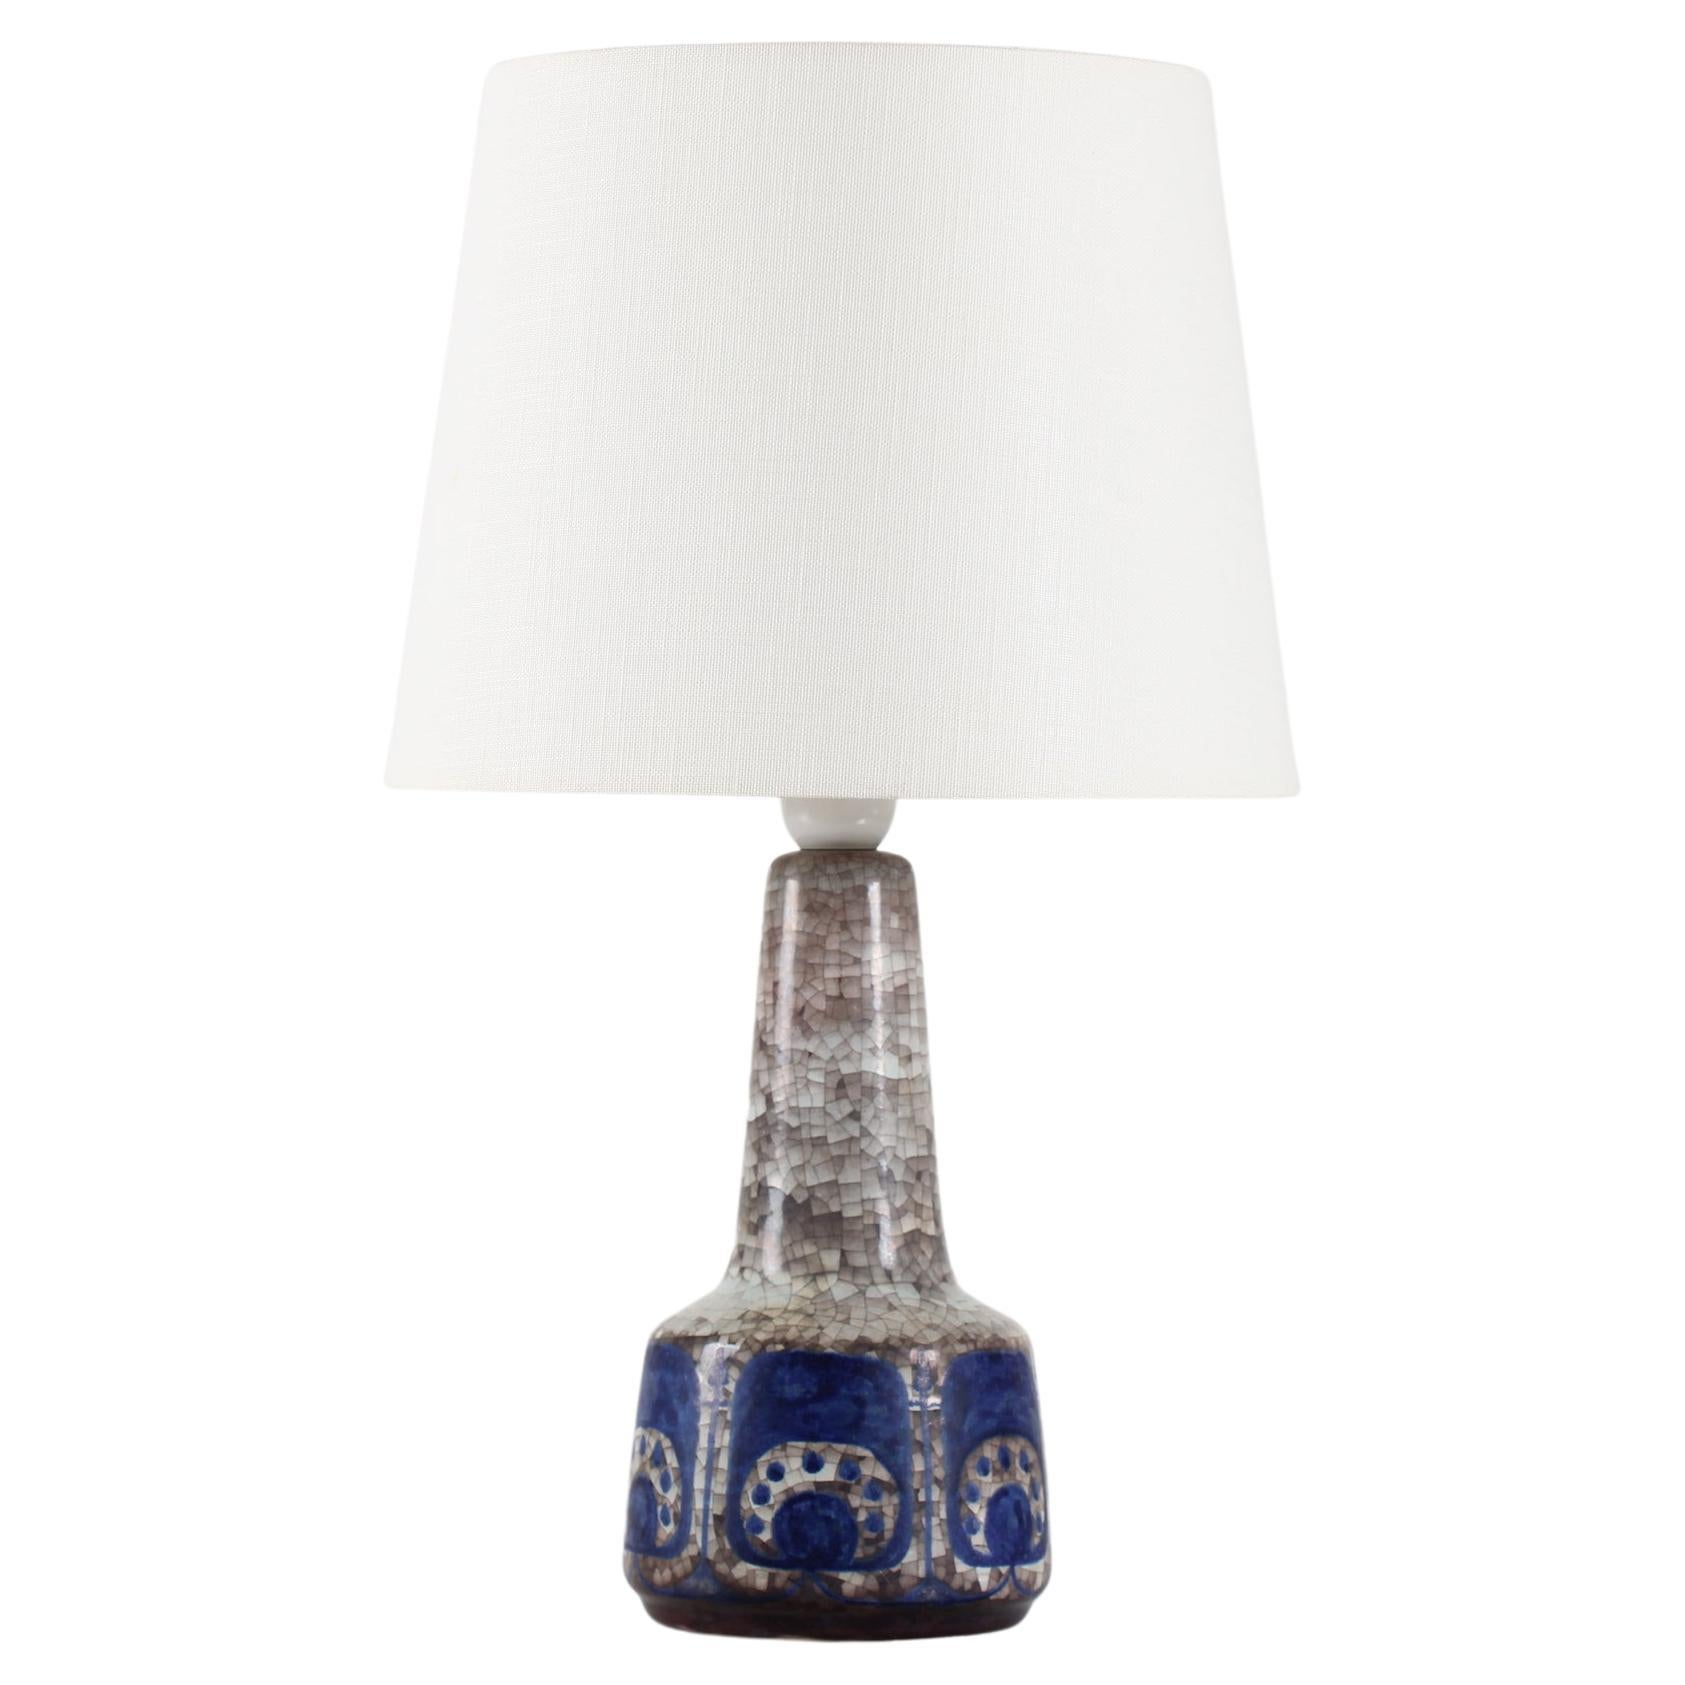 Medium Table Lamp by Marianne Starck for Michael Andersen Blue Persia Glaze 1960